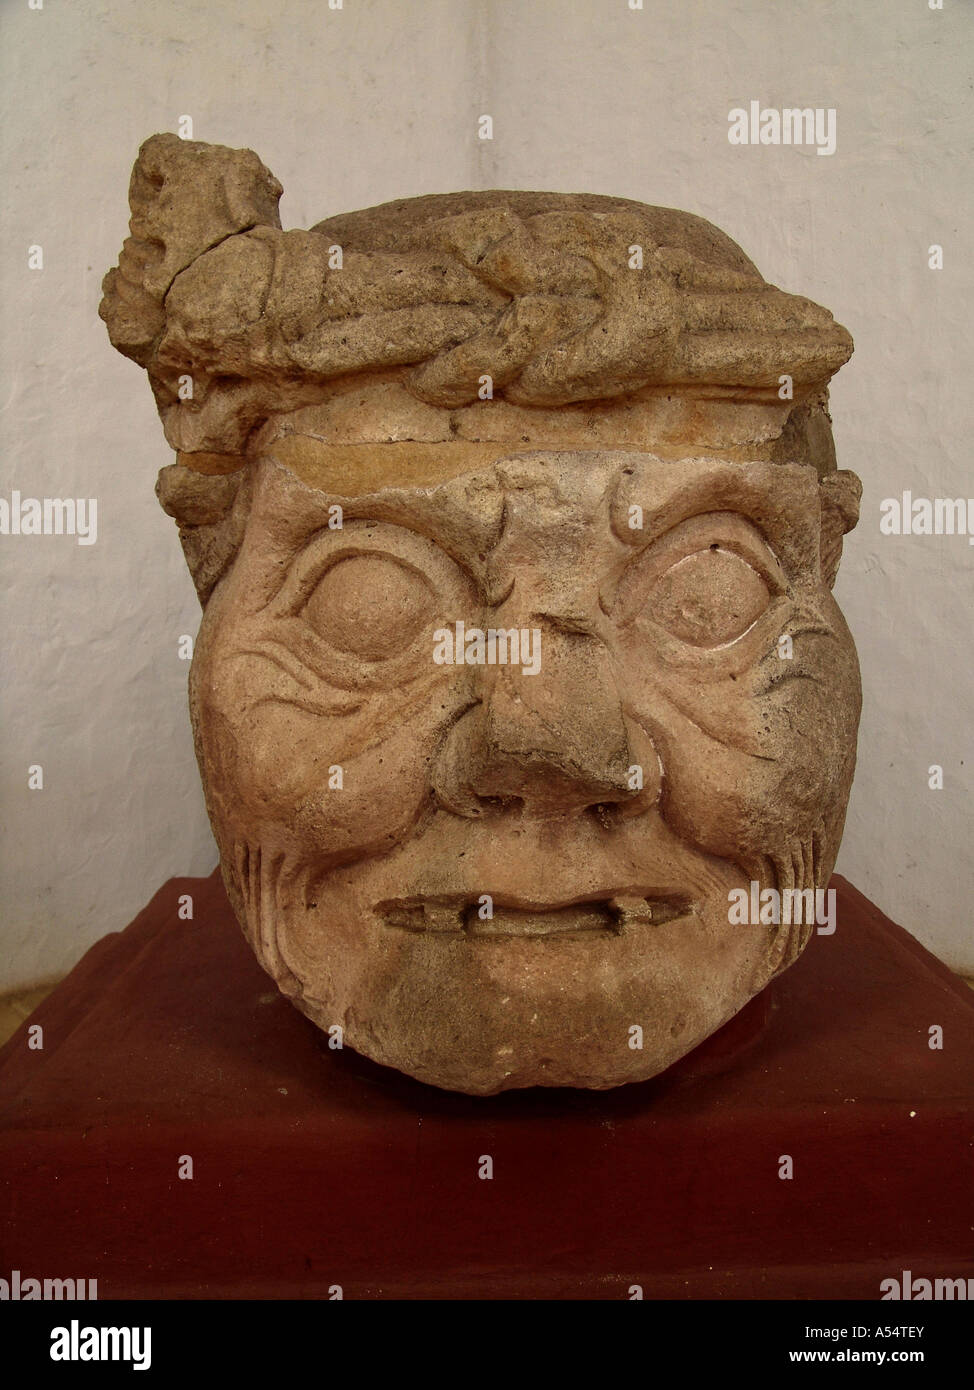 Painet ip1959 honduras stone head copan mayan ruins country developing nation less economically developed culture emerging Stock Photo